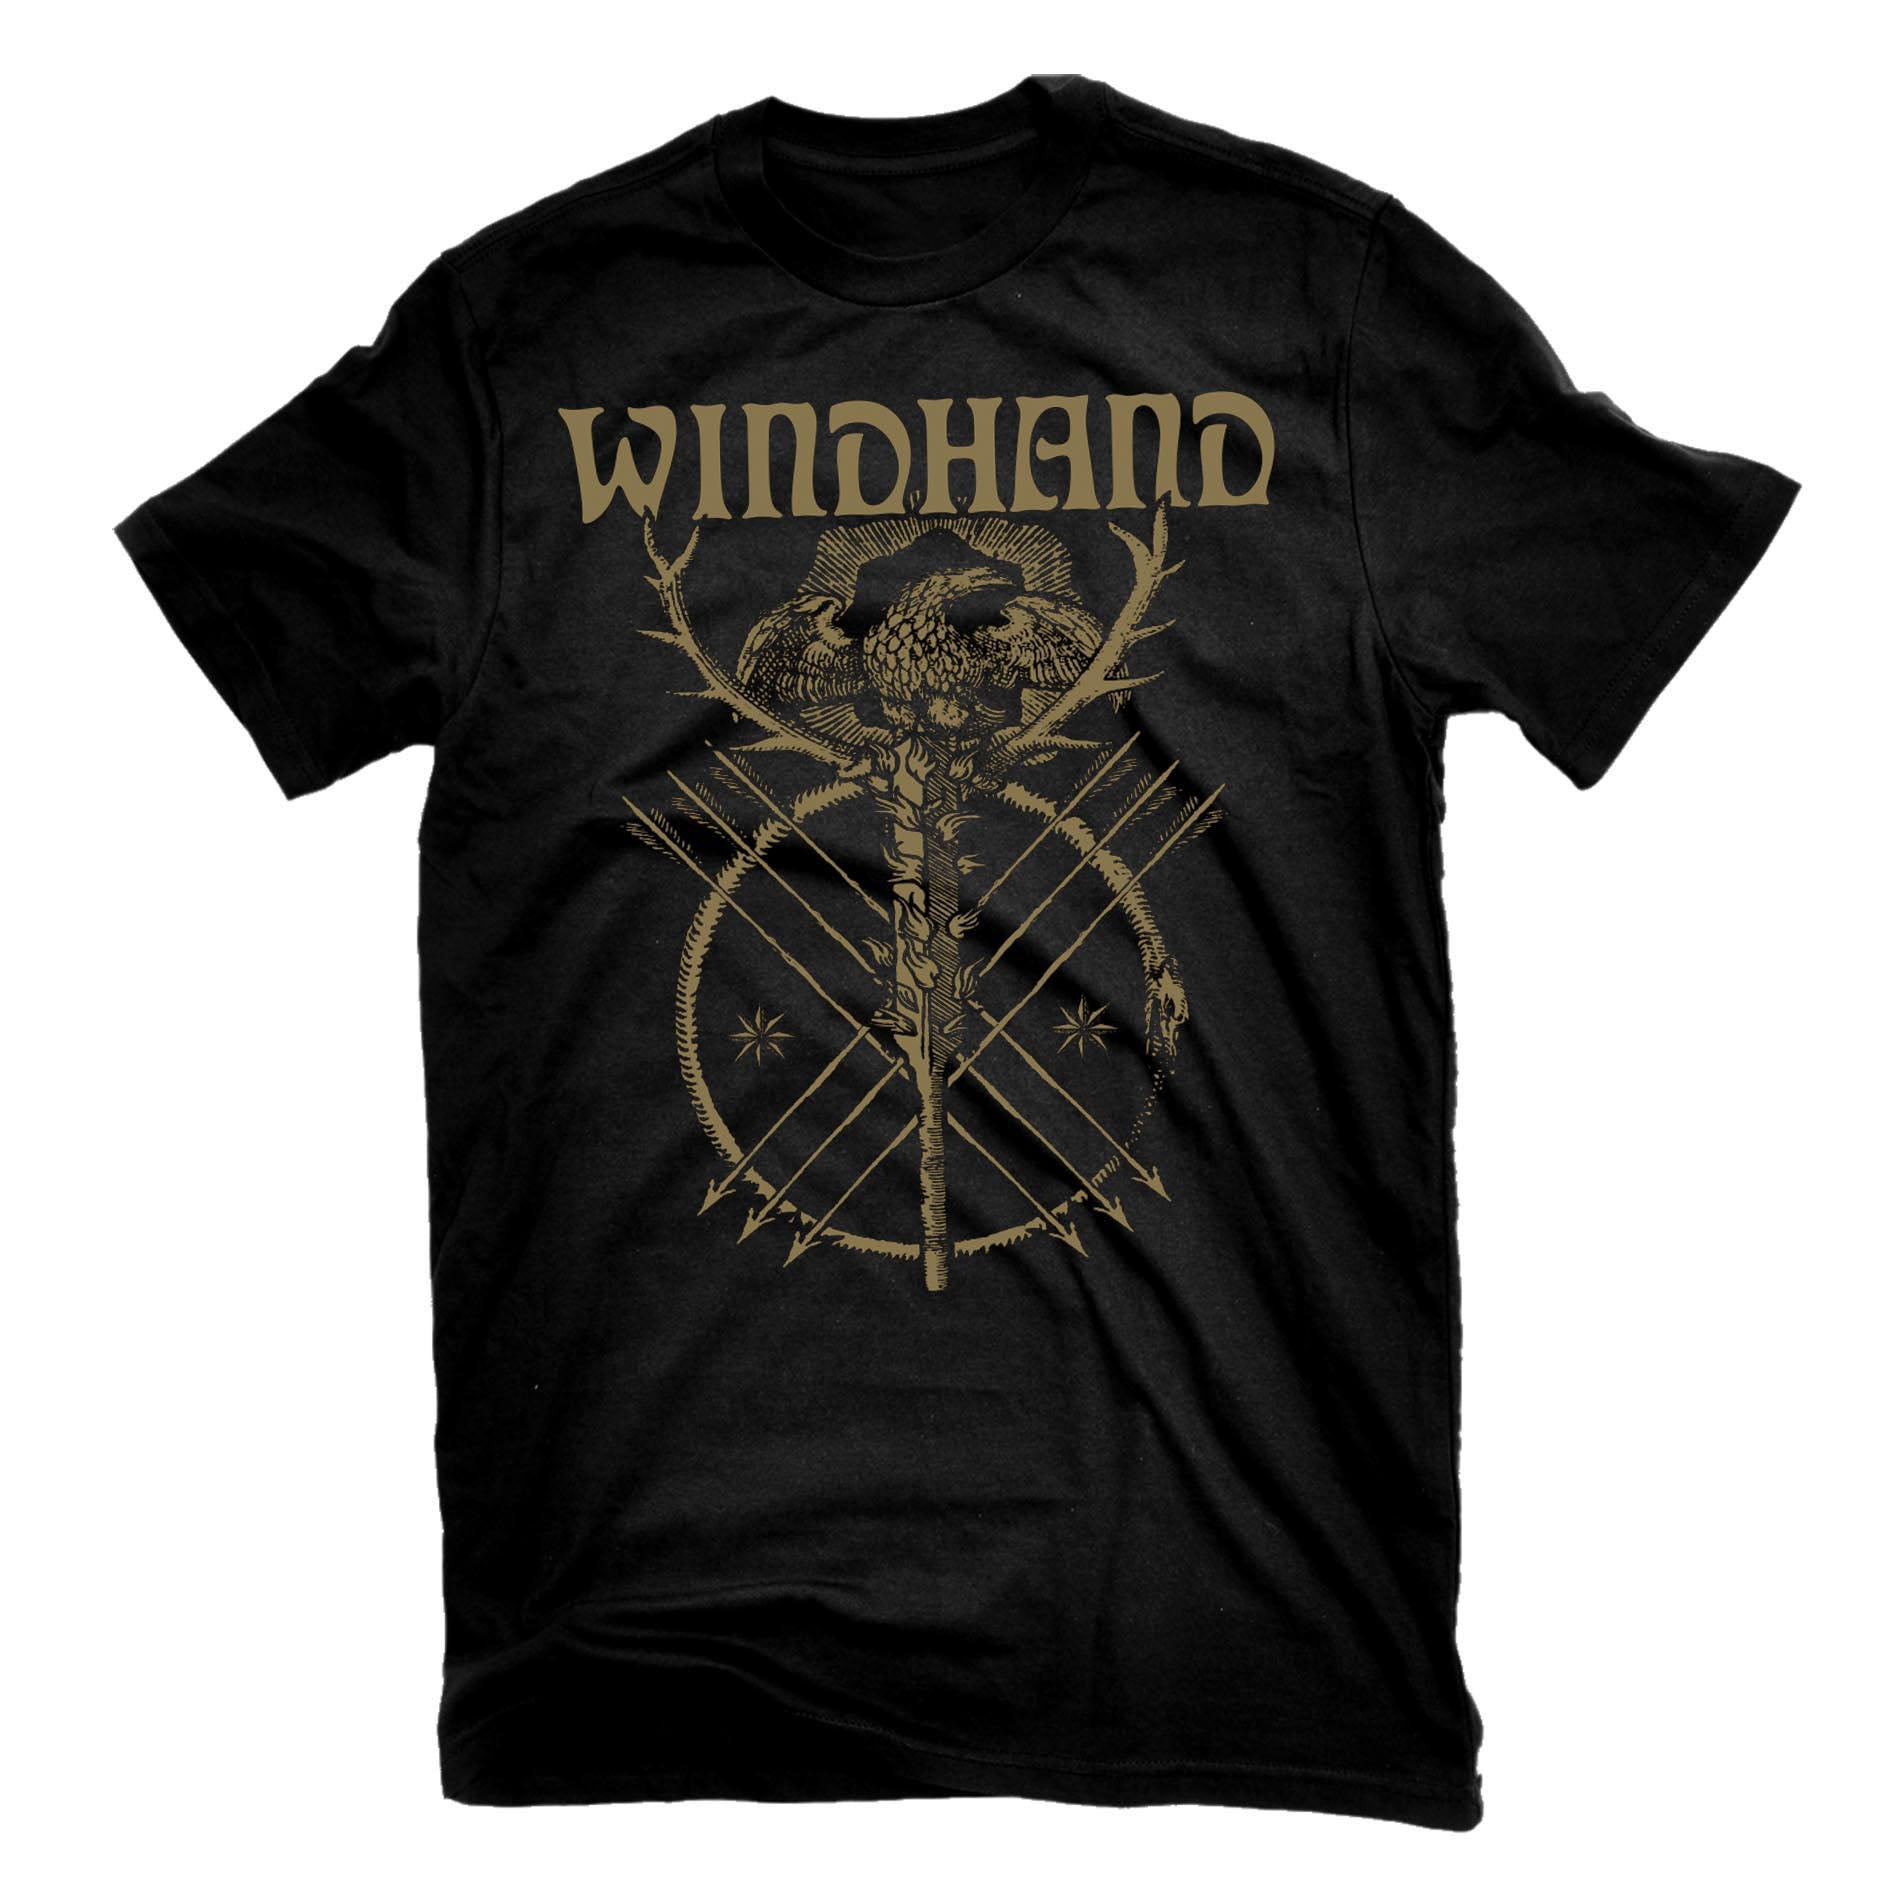 Windhand "Occult" T-Shirt